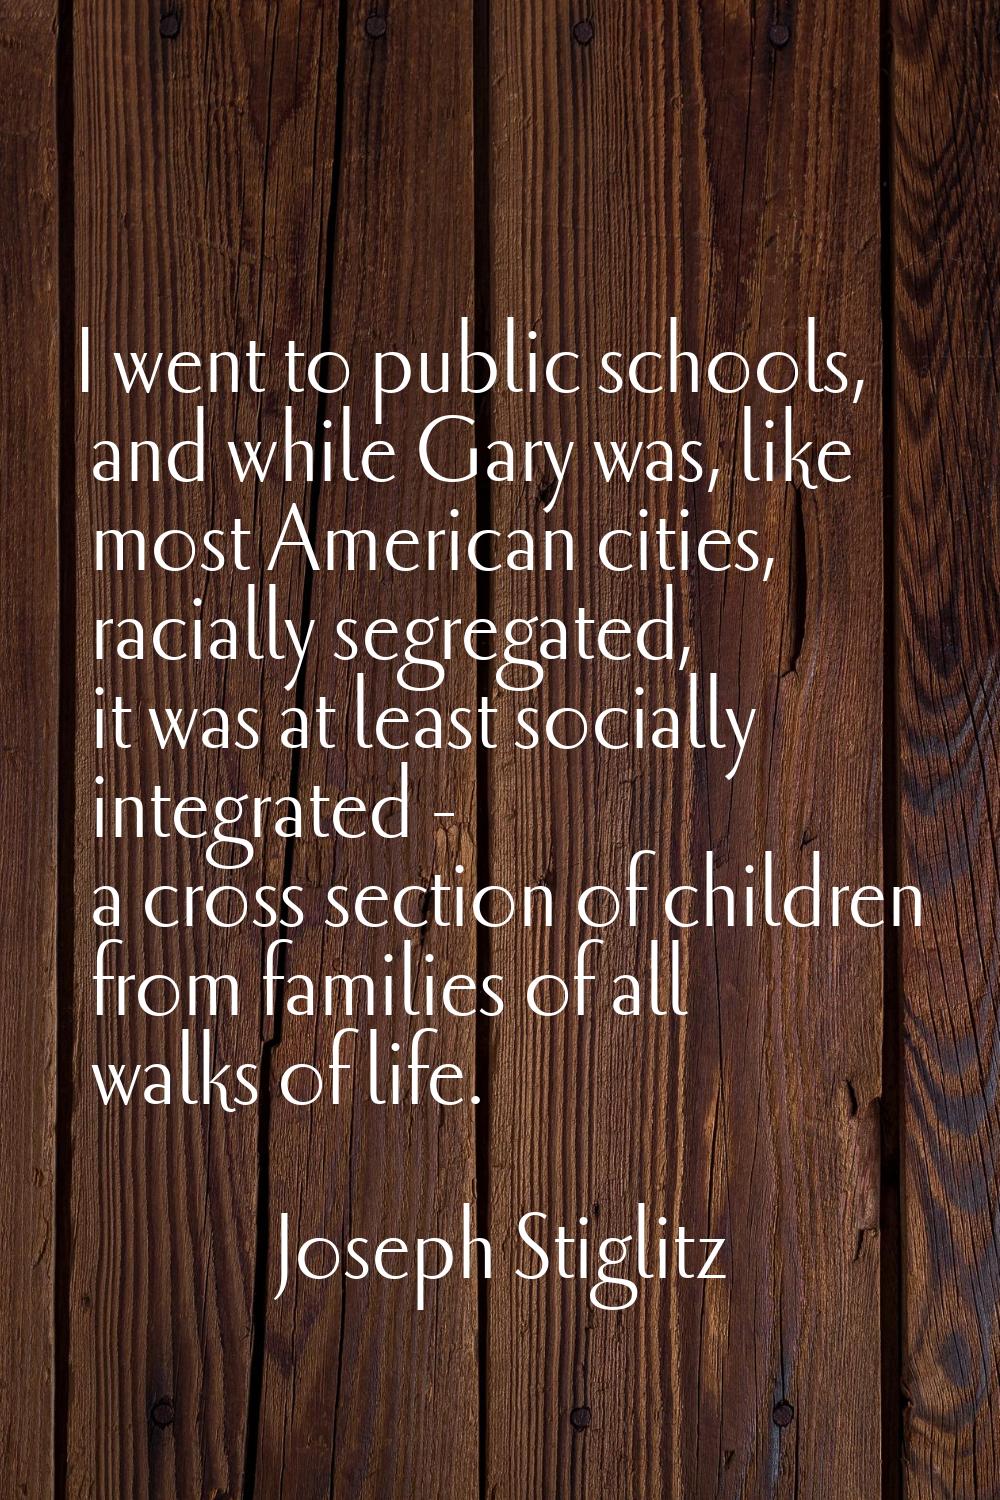 I went to public schools, and while Gary was, like most American cities, racially segregated, it wa